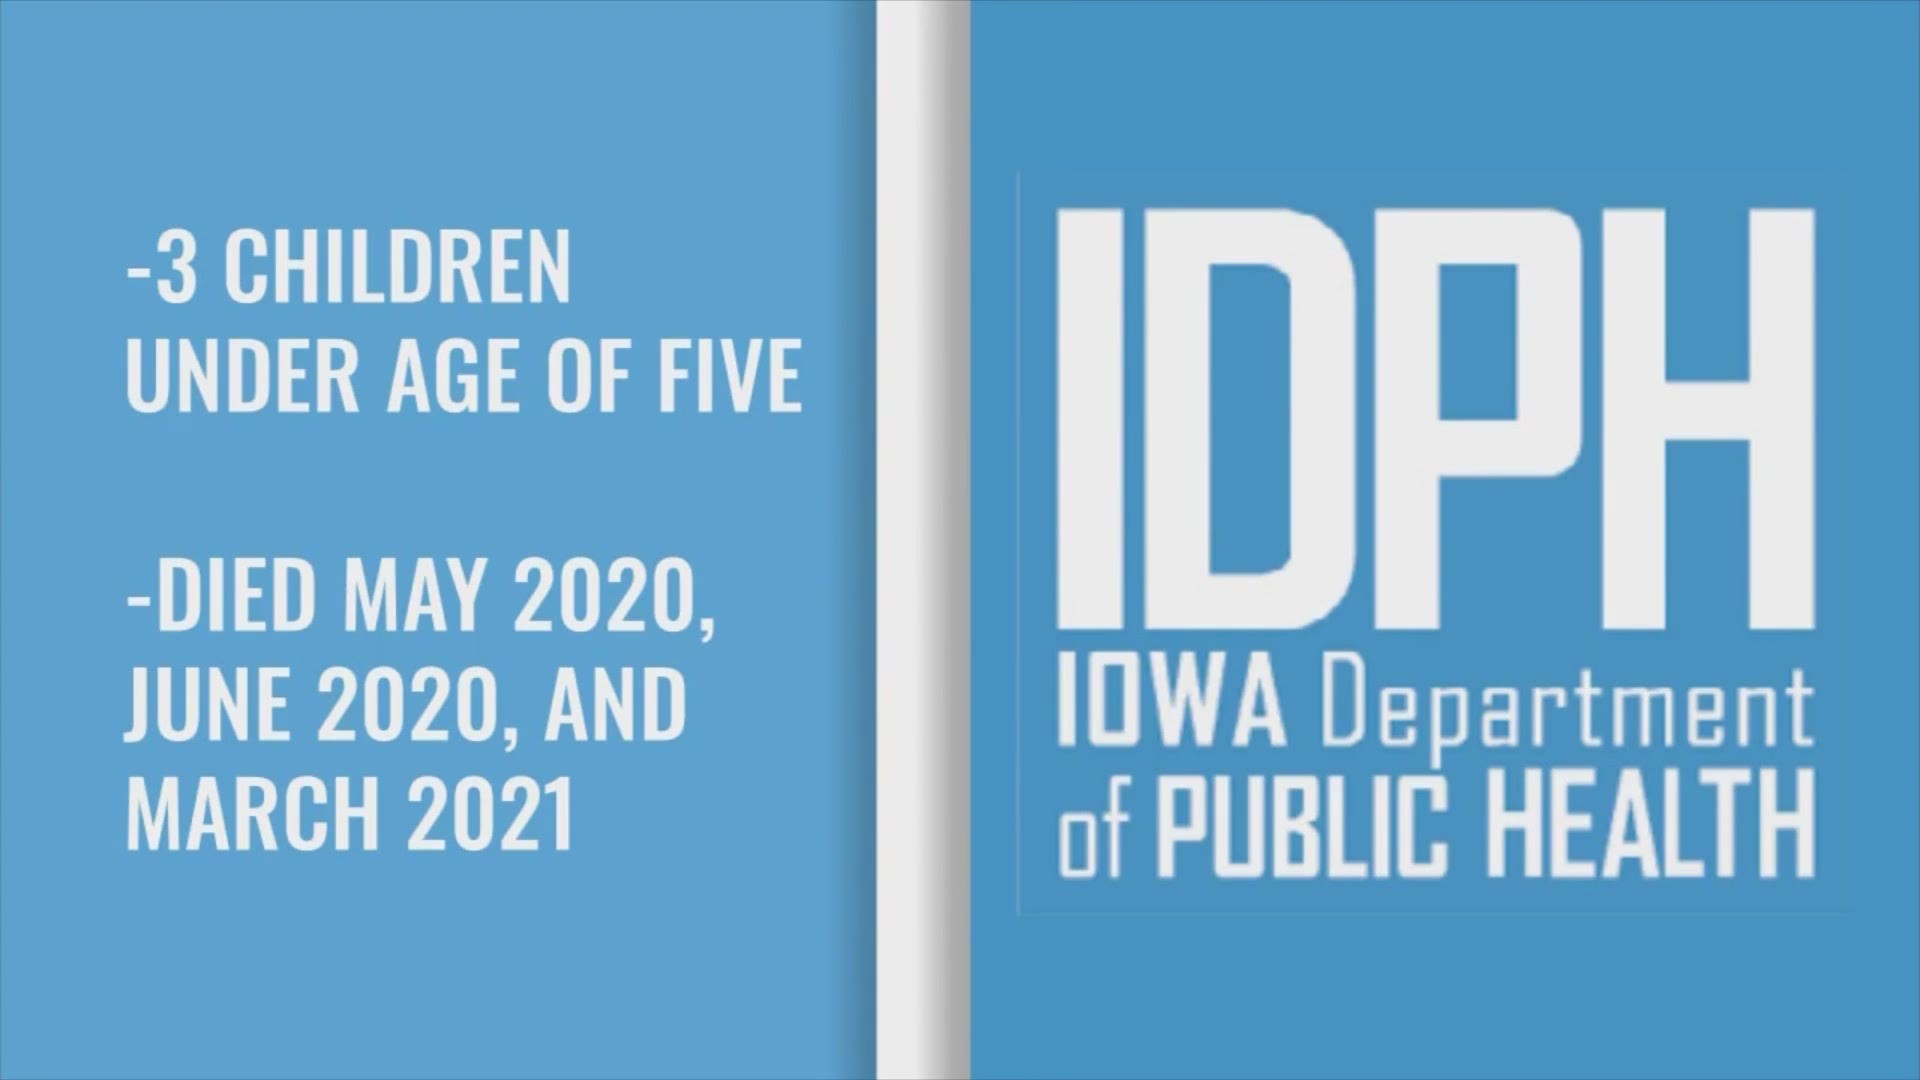 All children were under the age of five, according to the Iowa Department of Public Health.